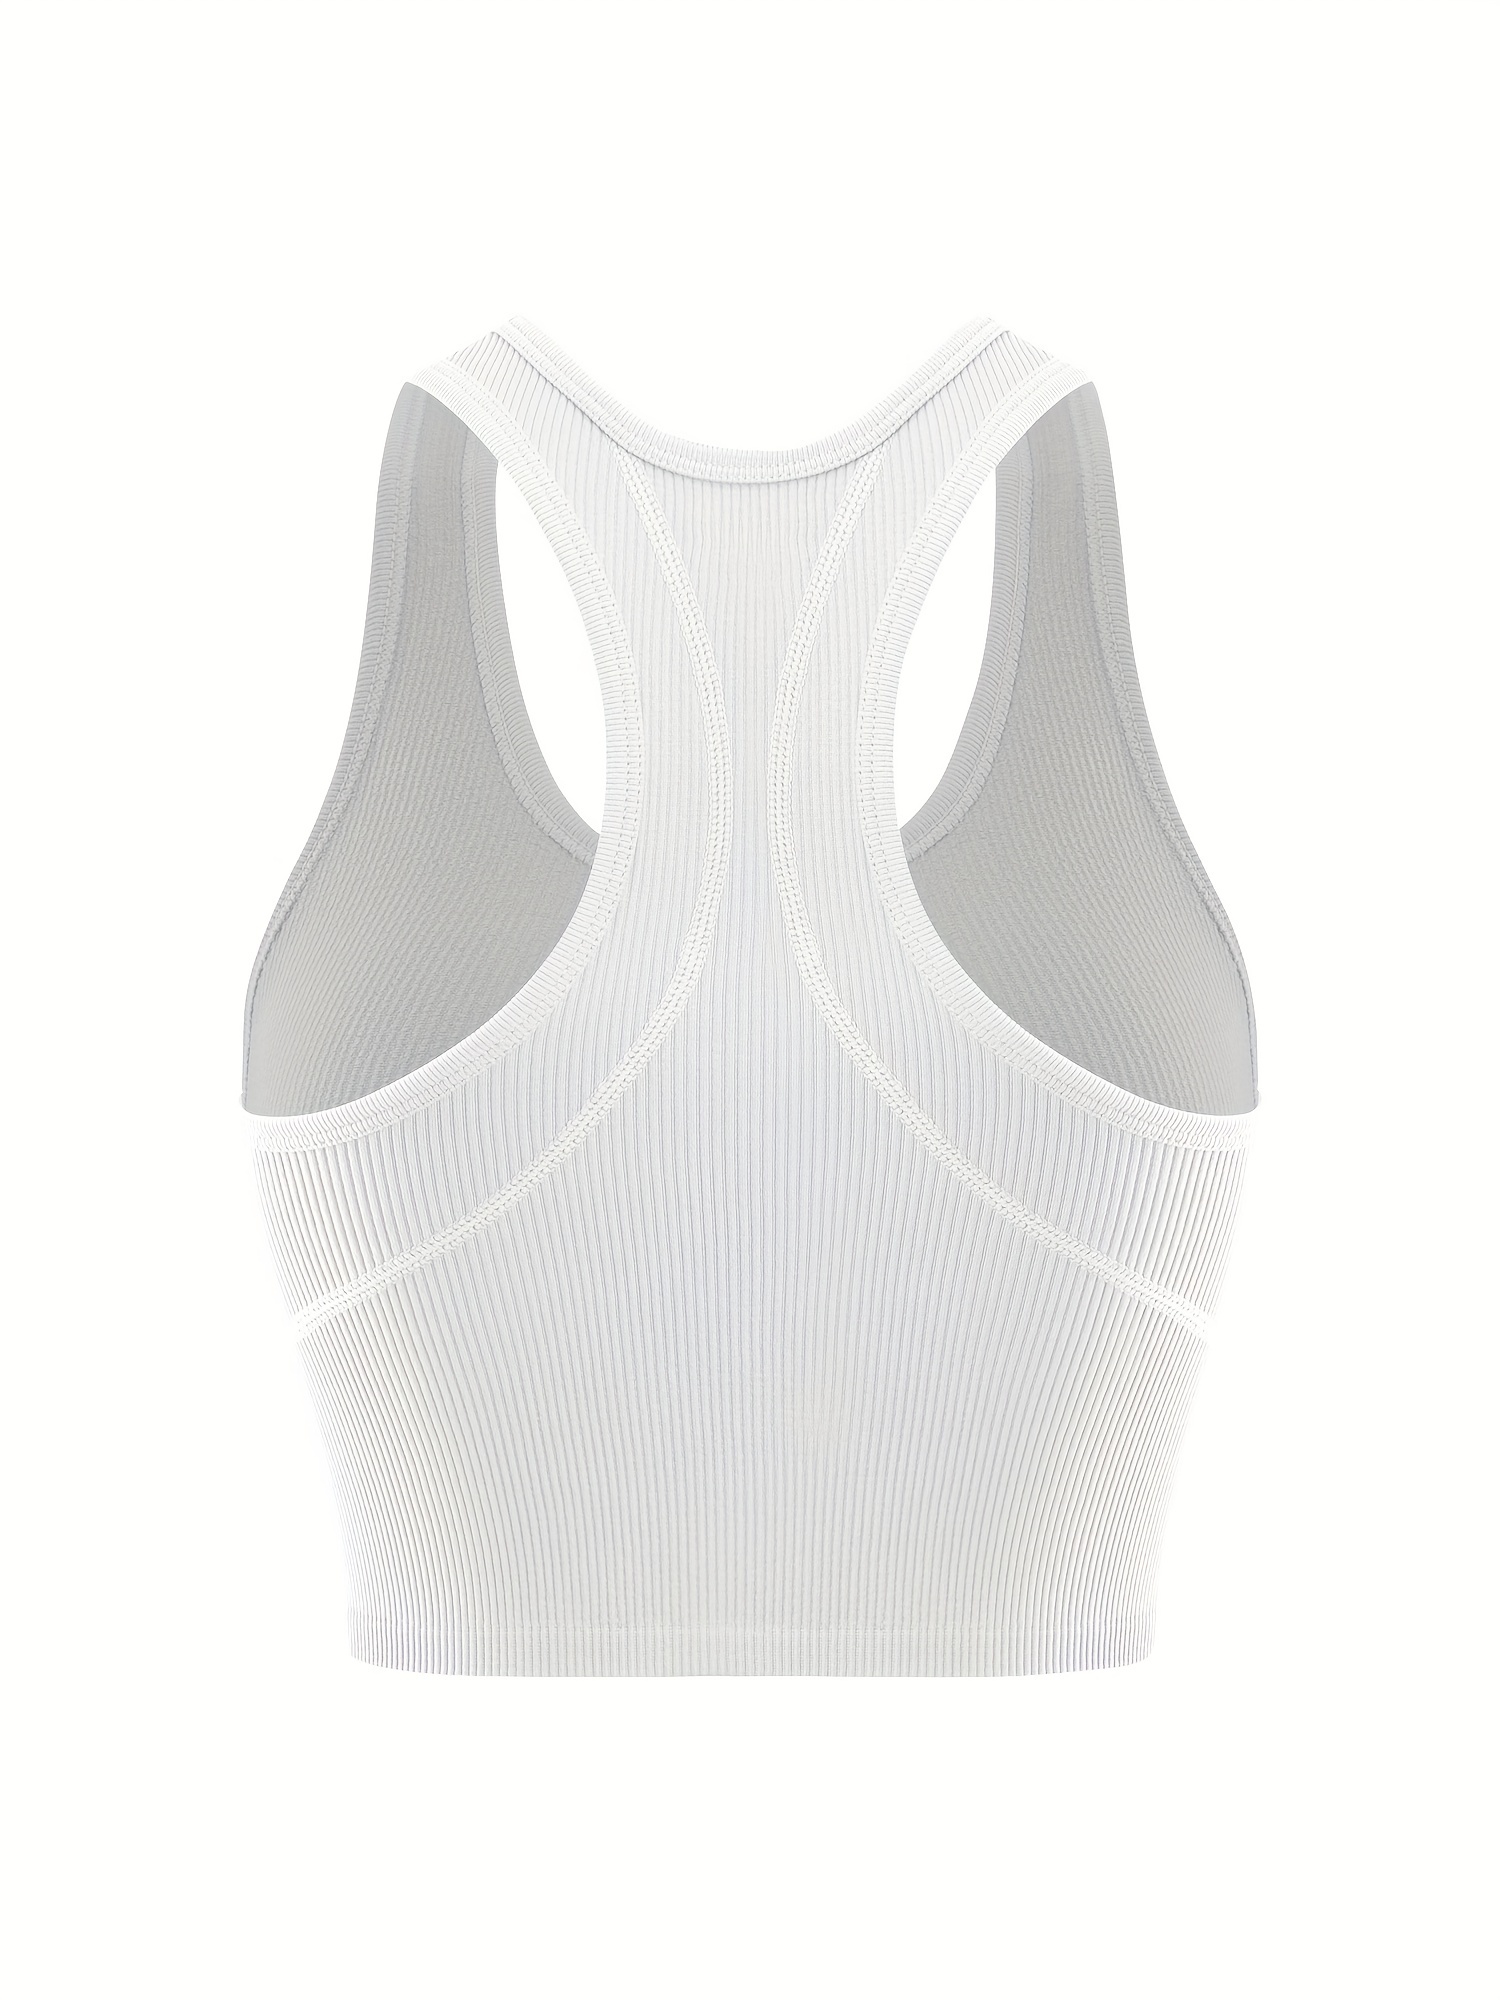 Lu's Chic Women's Padded Tank Tops Workout Strappy Athletic Gym Sports Bra  Ribbed Yoga Crop Top White Medium